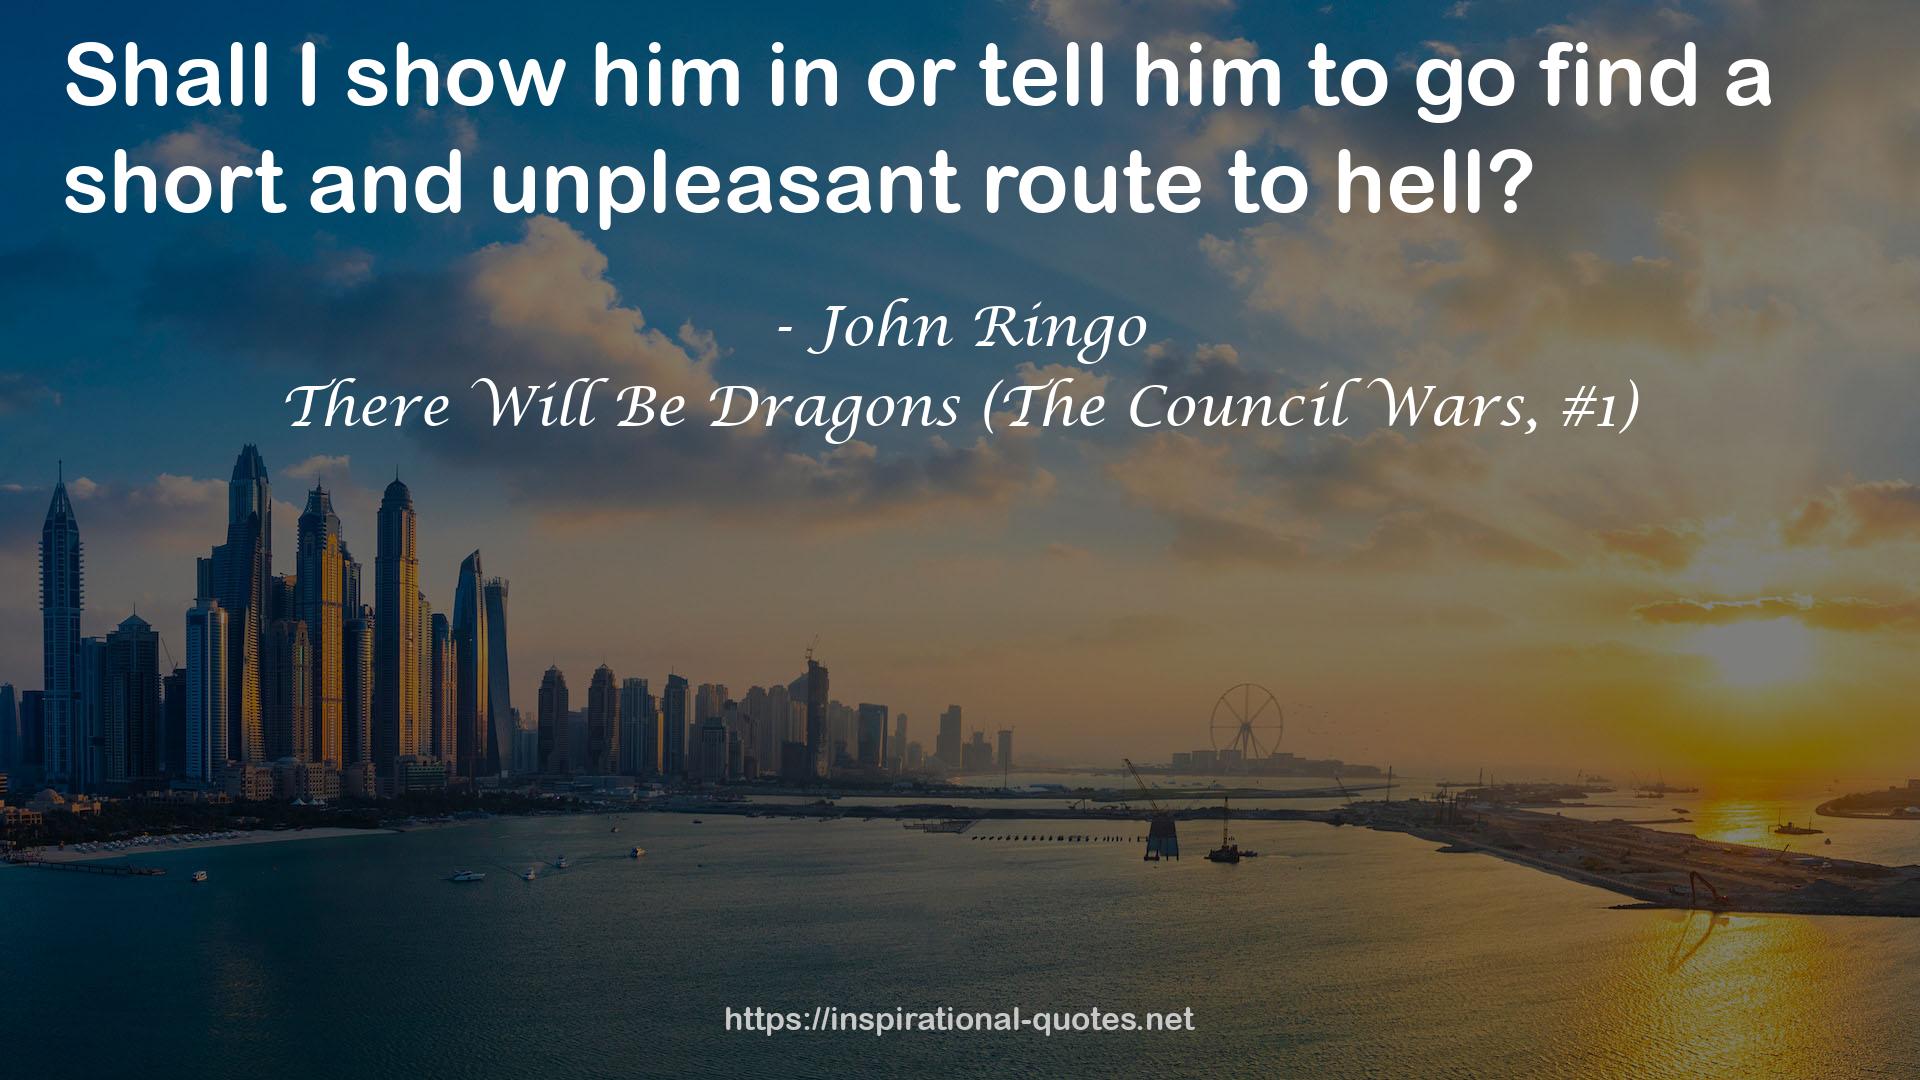 There Will Be Dragons (The Council Wars, #1) QUOTES